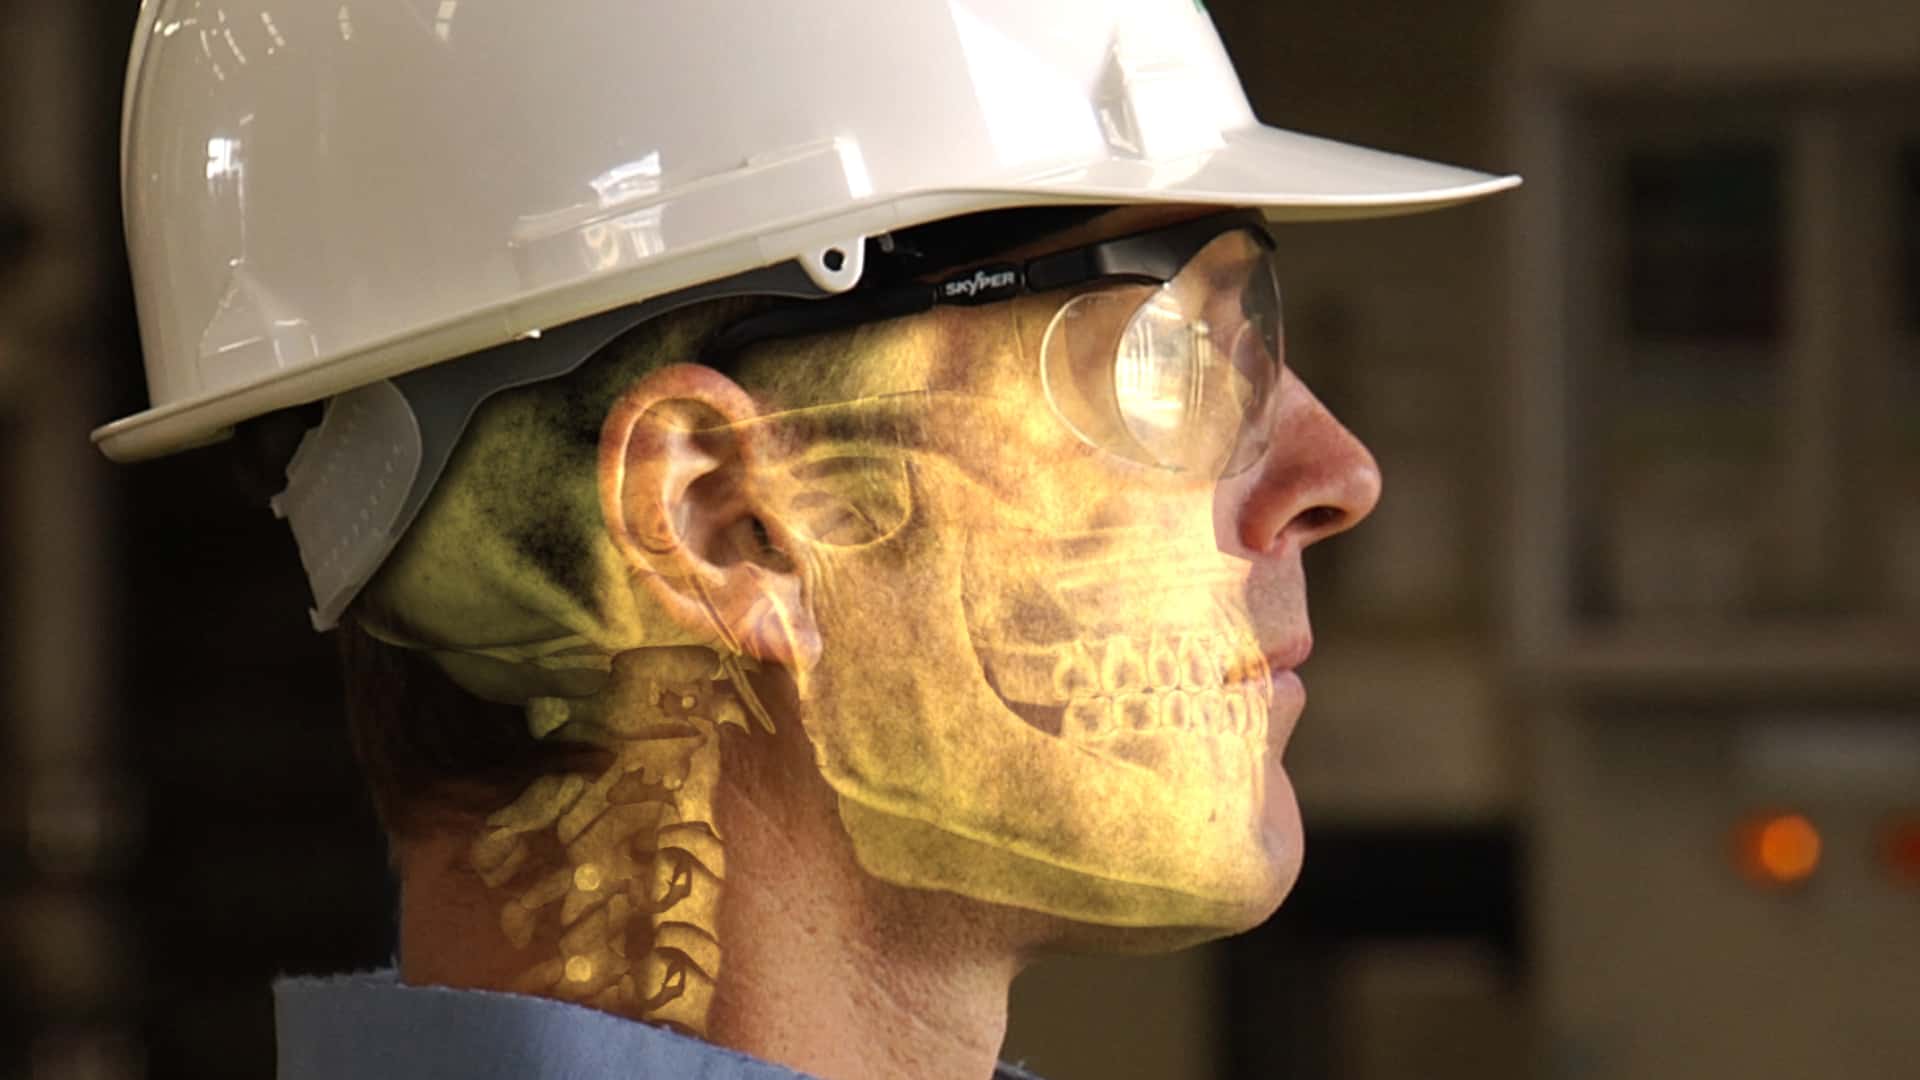 Head Protection in the Workplace - PPE Training - Safetyhub